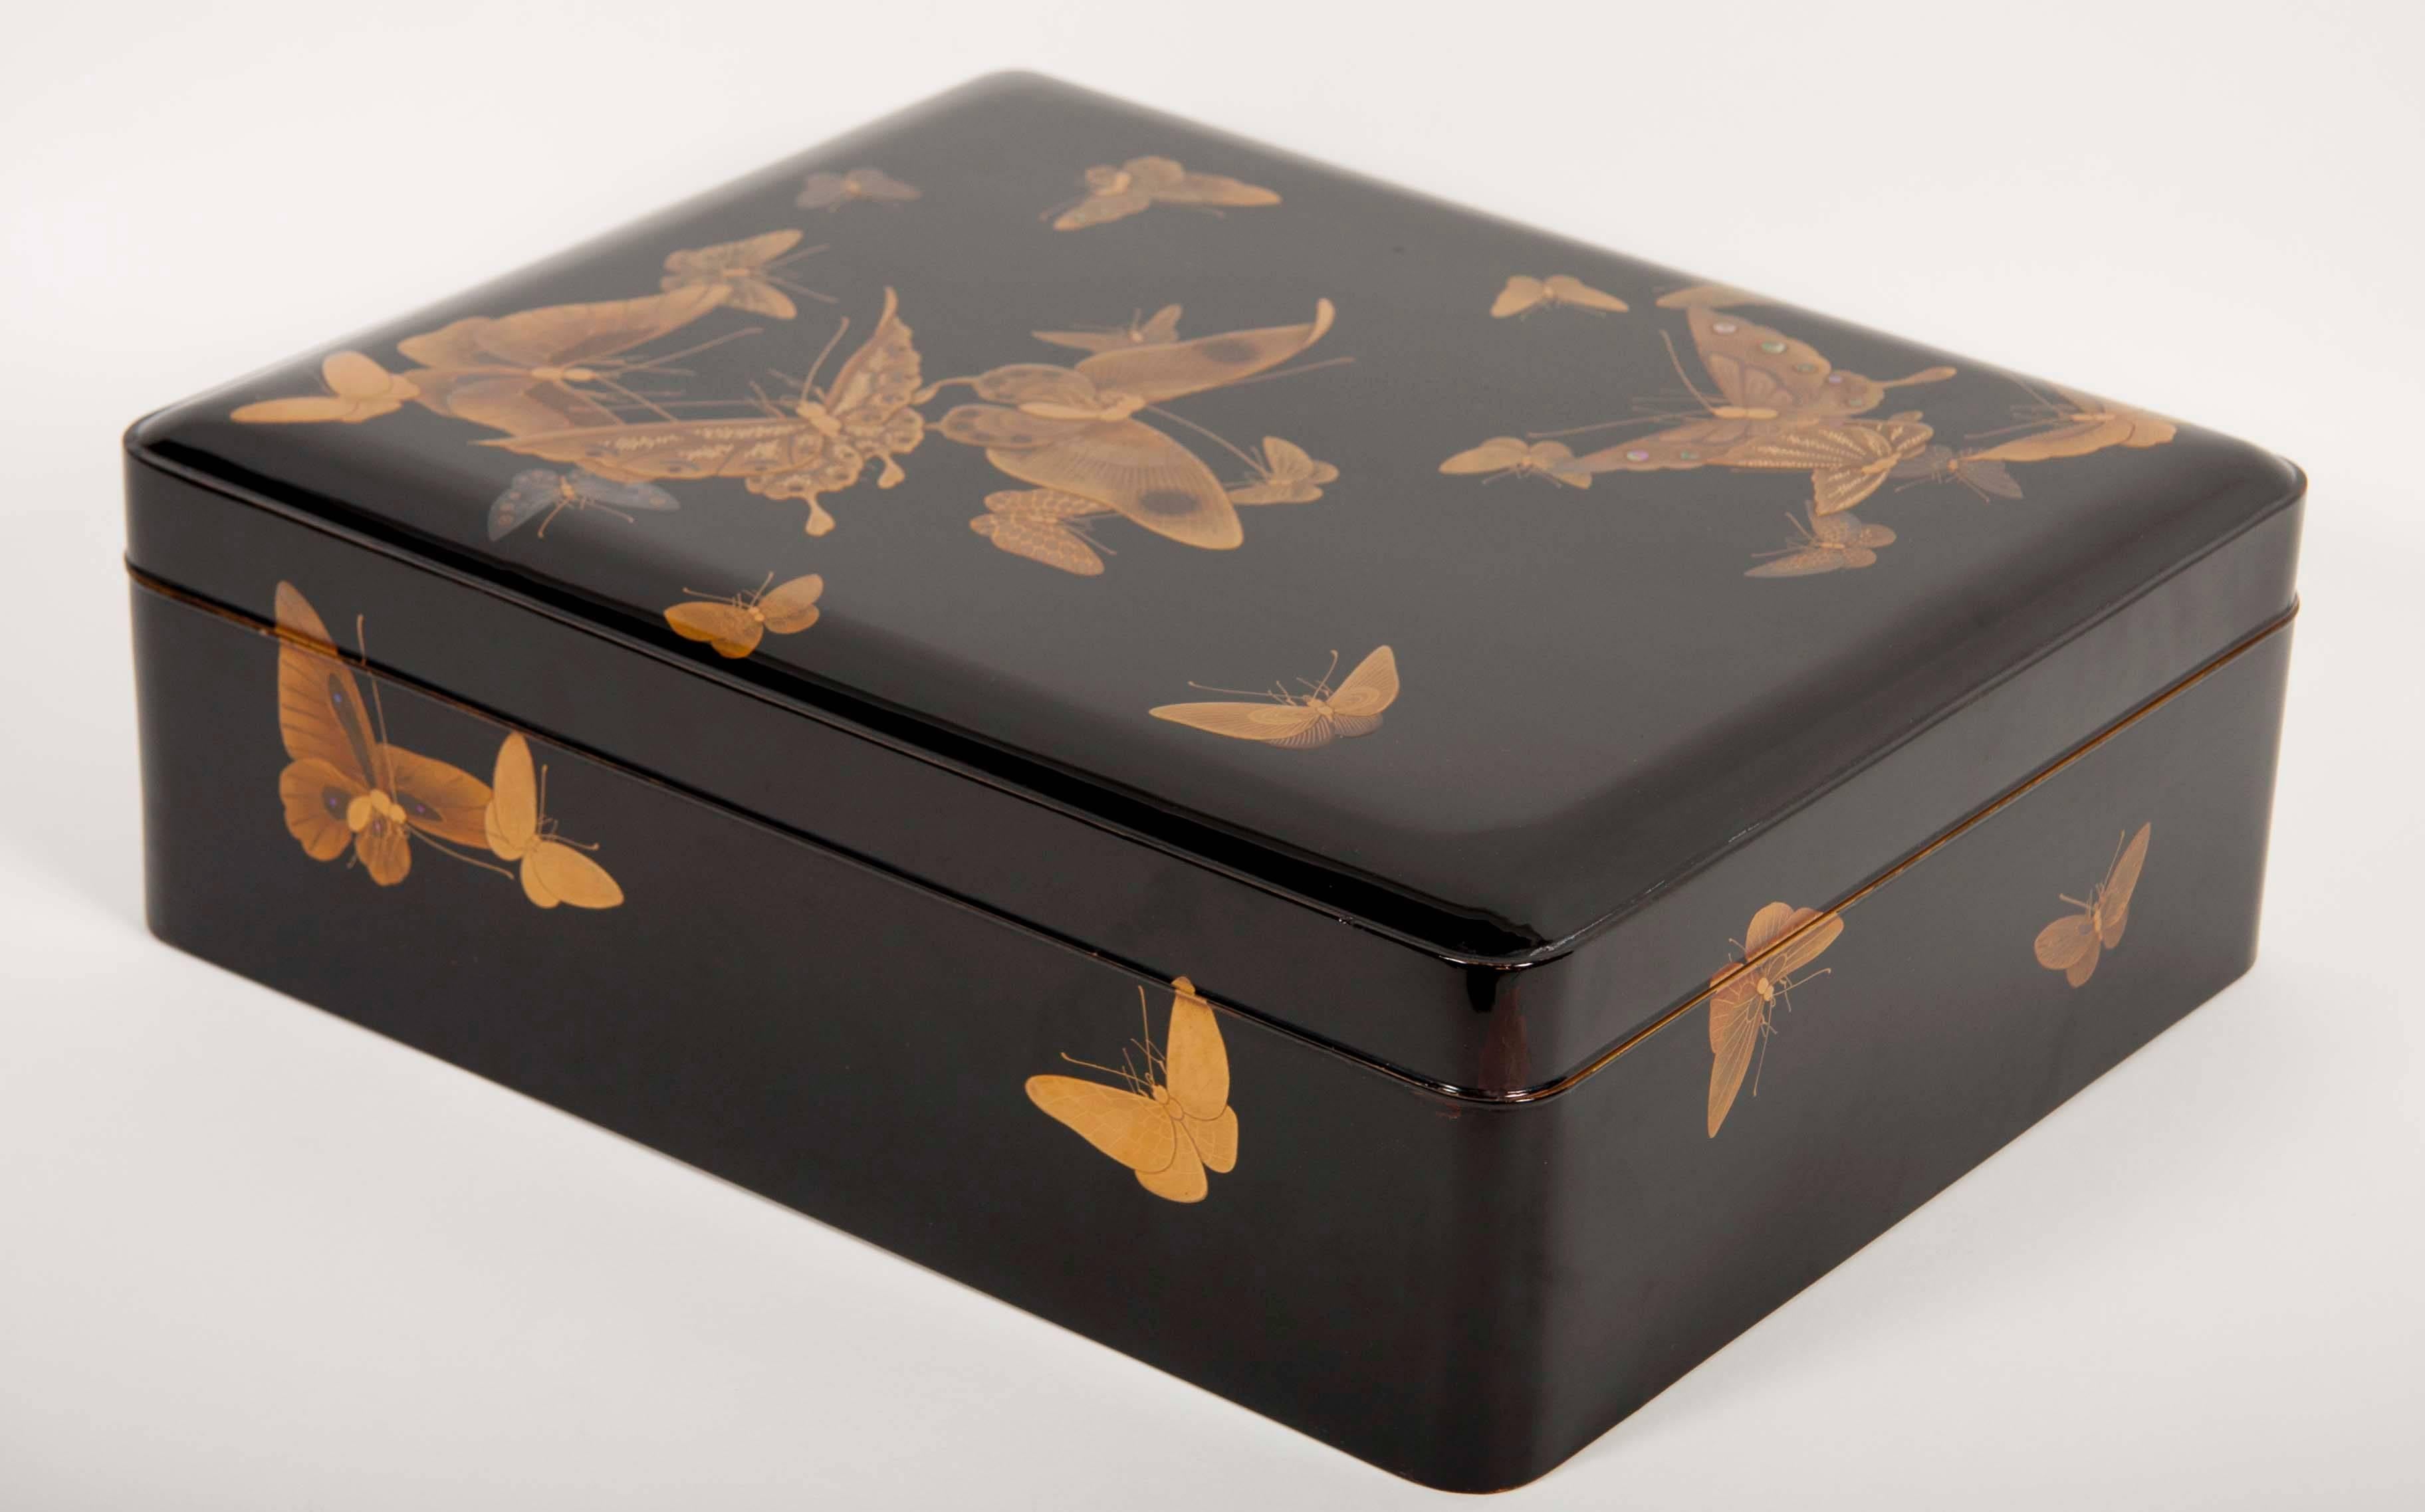 A large early 20th century Japanese Ryoshibako (document) box of black lacquer with rounded corners beautifully decorated with gold butterflies. The interior of the lid having additional decoration in gold set on a dark red background of water with